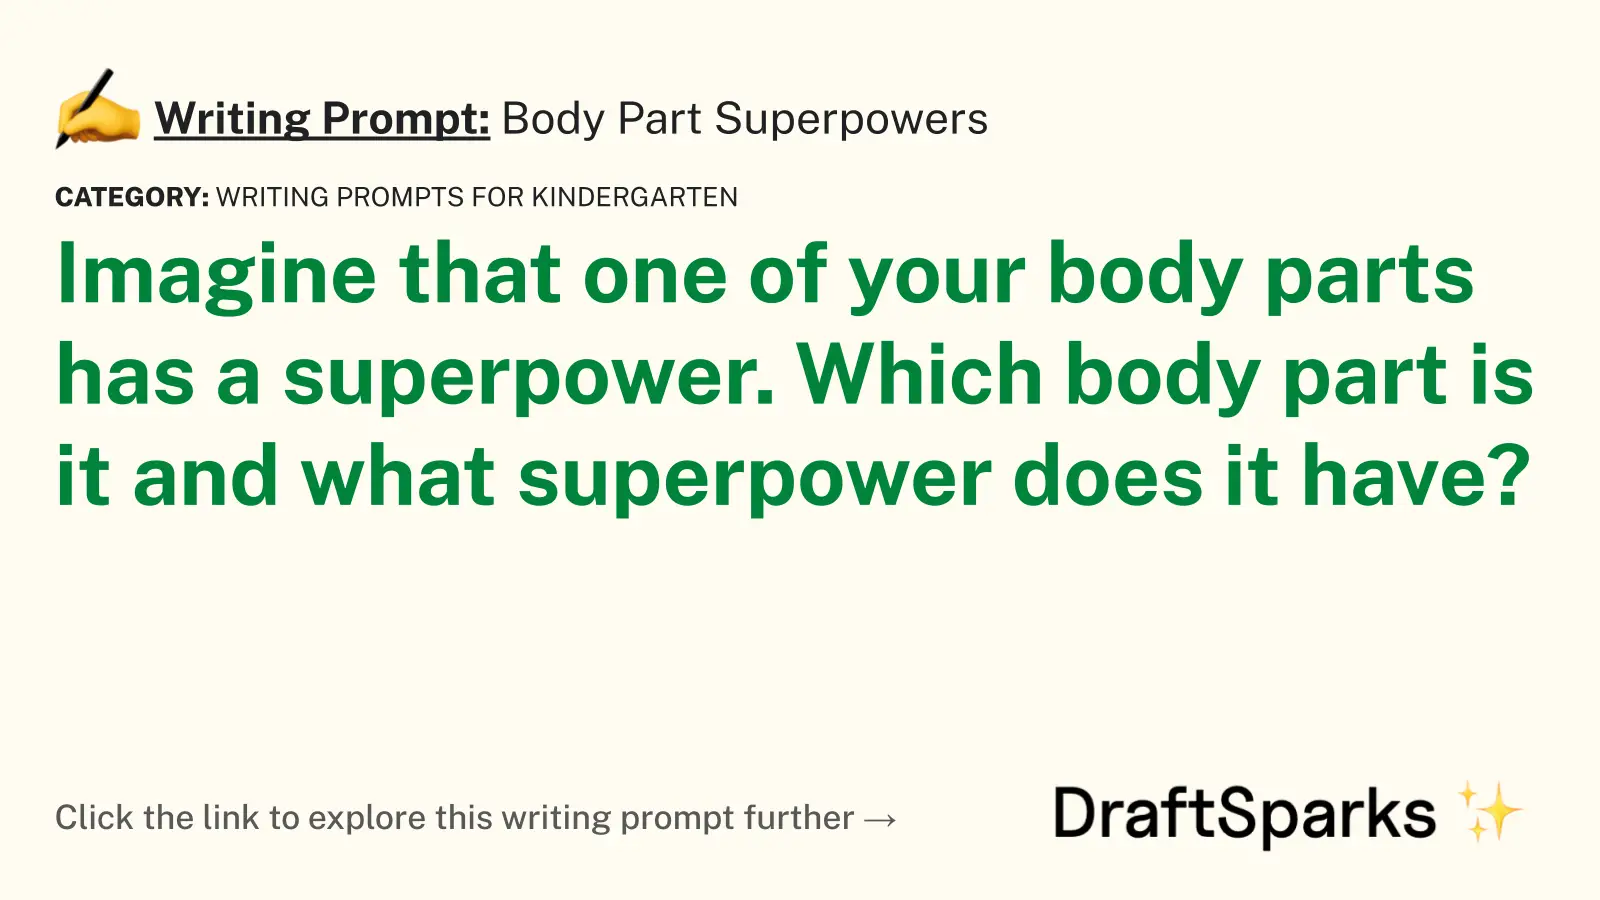 Body Part Superpowers